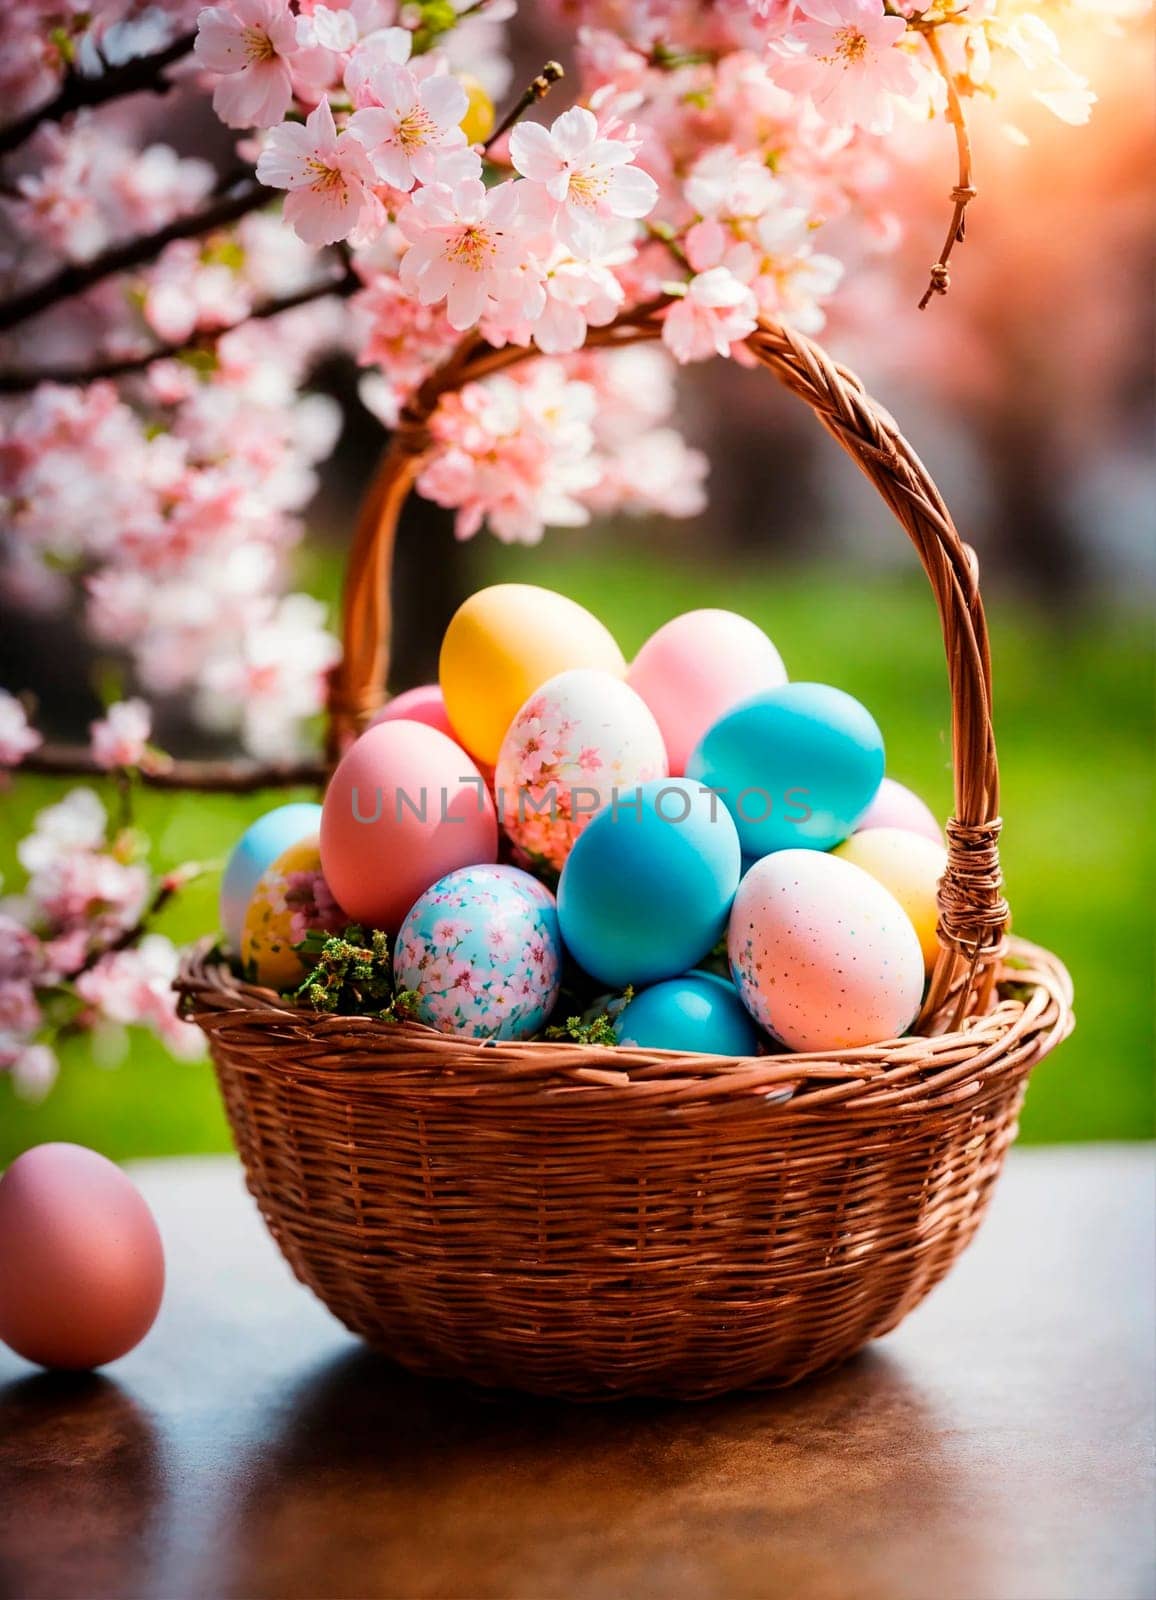 Basket with Easter eggs. Selective focus. by yanadjana